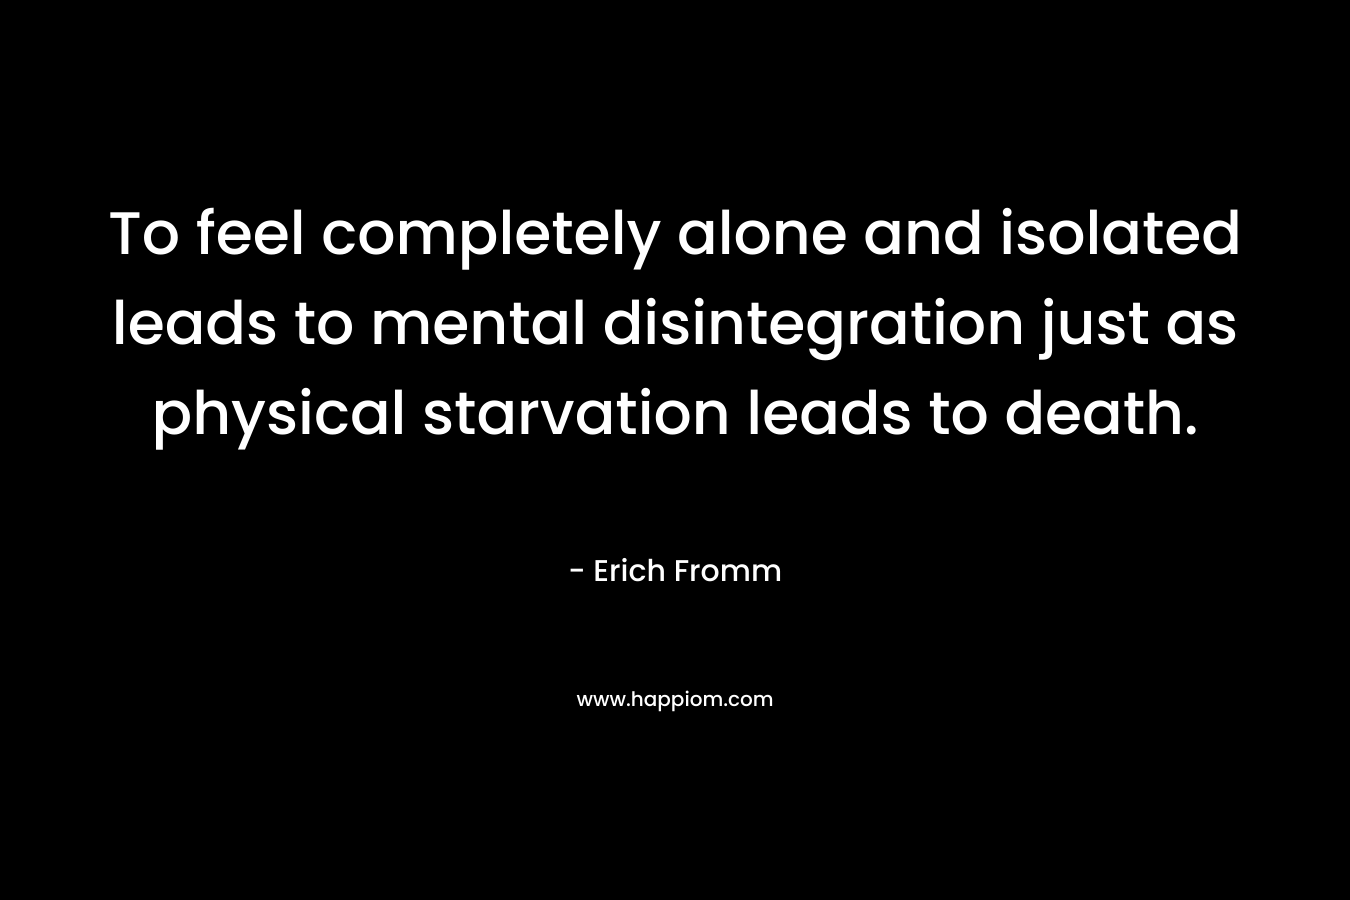 To feel completely alone and isolated leads to mental disintegration just as physical starvation leads to death. – Erich Fromm